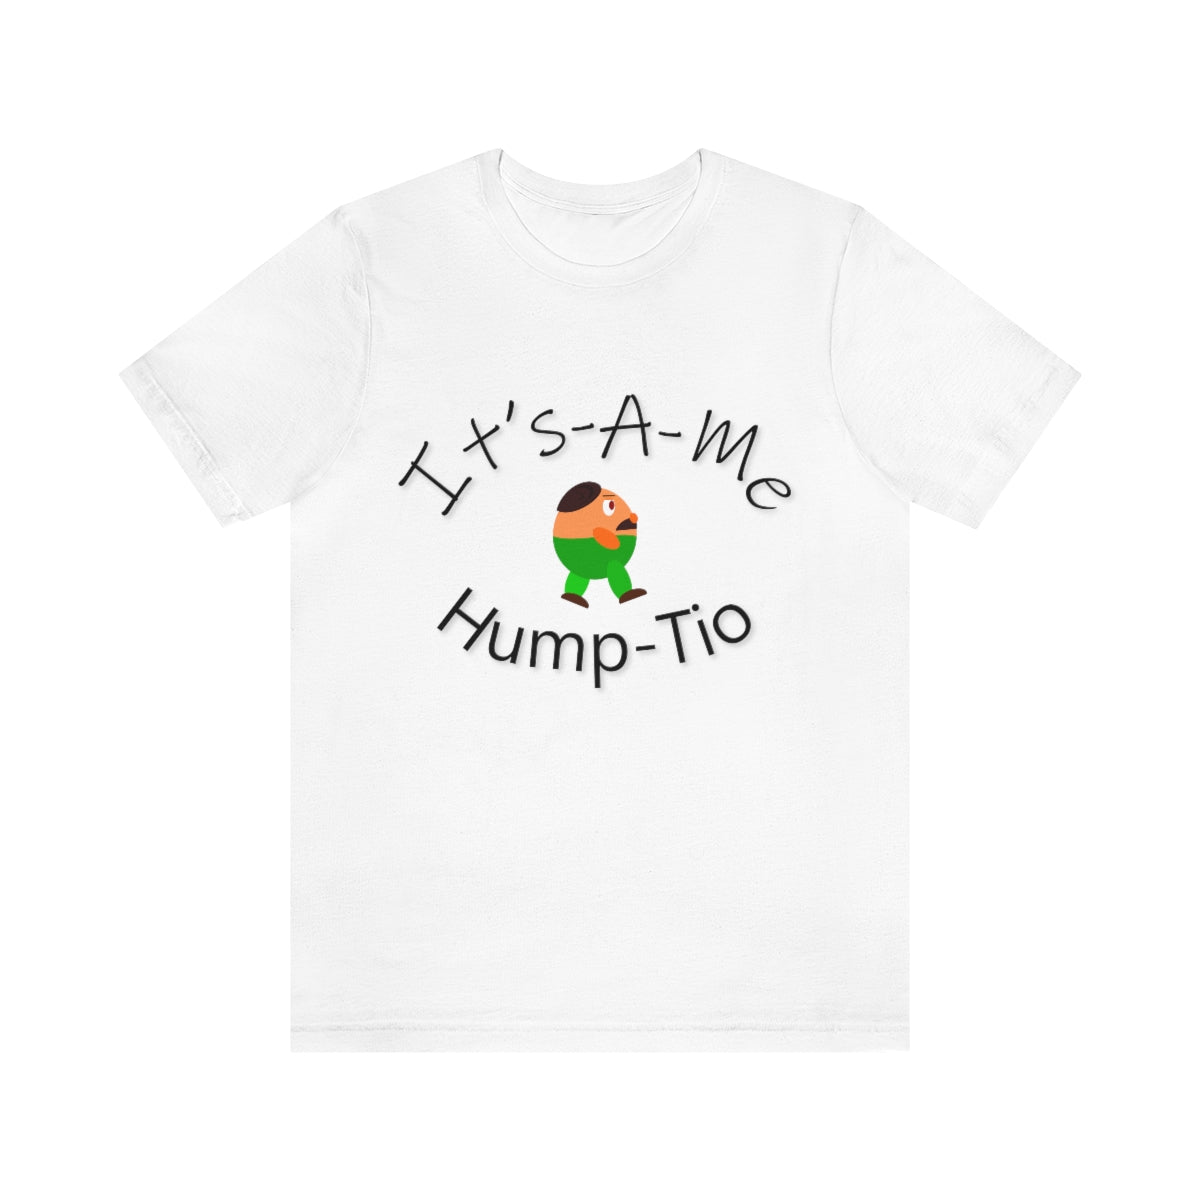 It's-A-Me Hump-tio - Funny Gamer - Unisex Short Sleeve Tee